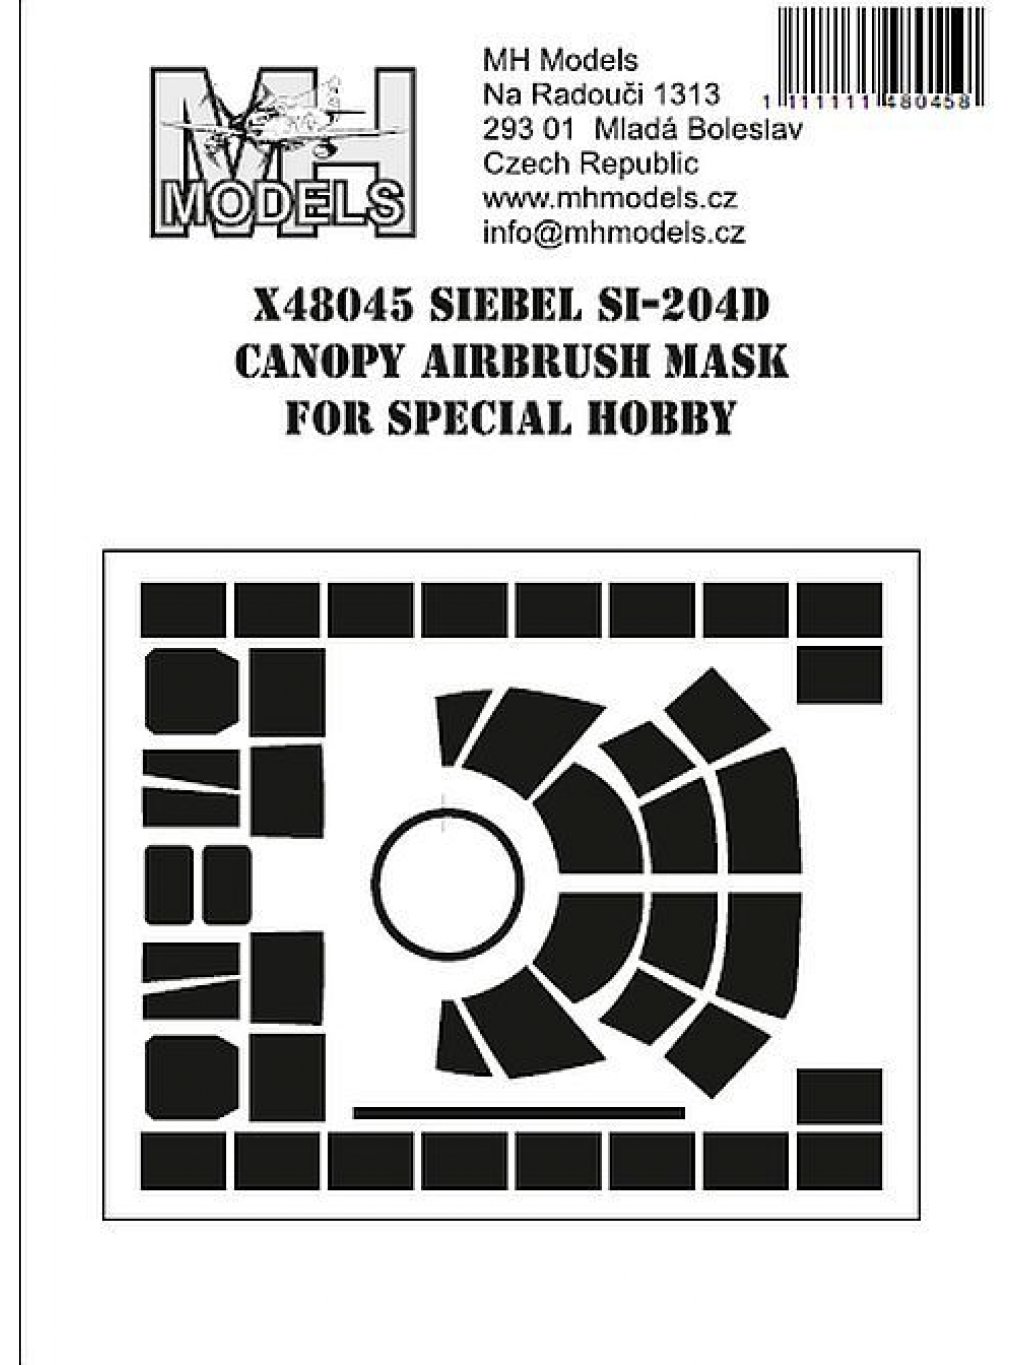 Siebel Si-204D canopy airbrush mask for Special Hobby